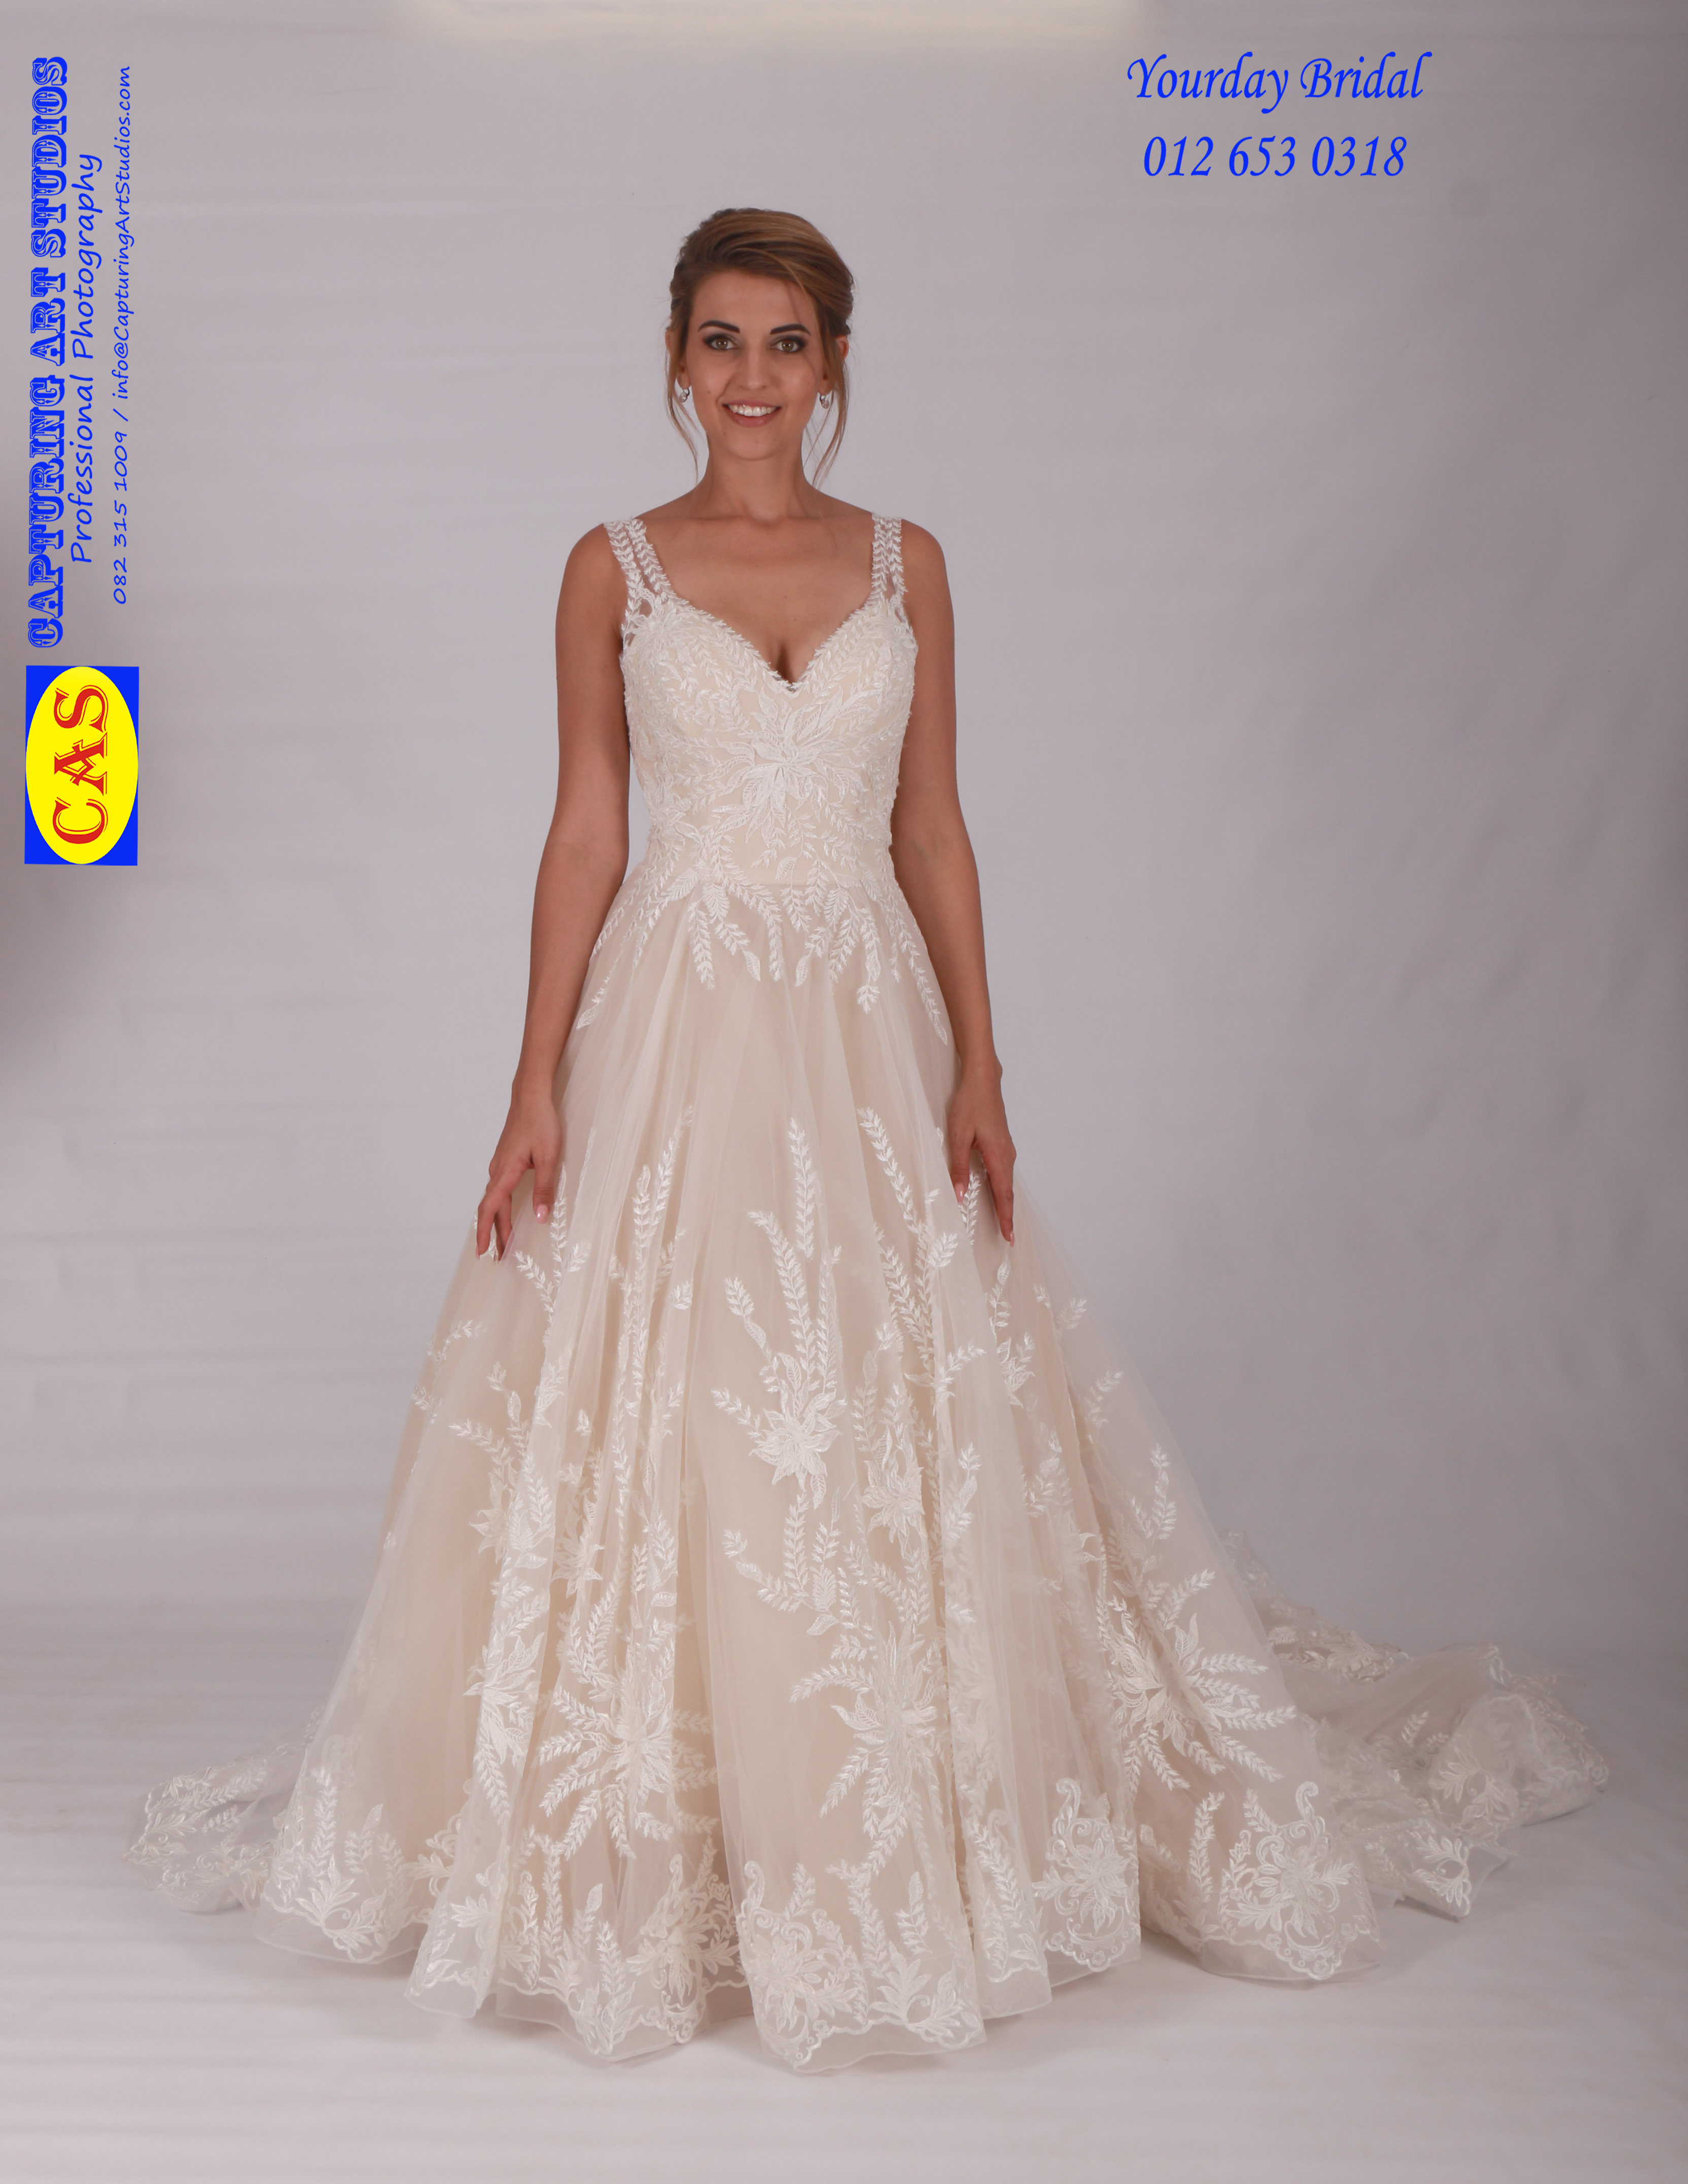 exclusive-wedding-collection-1-f